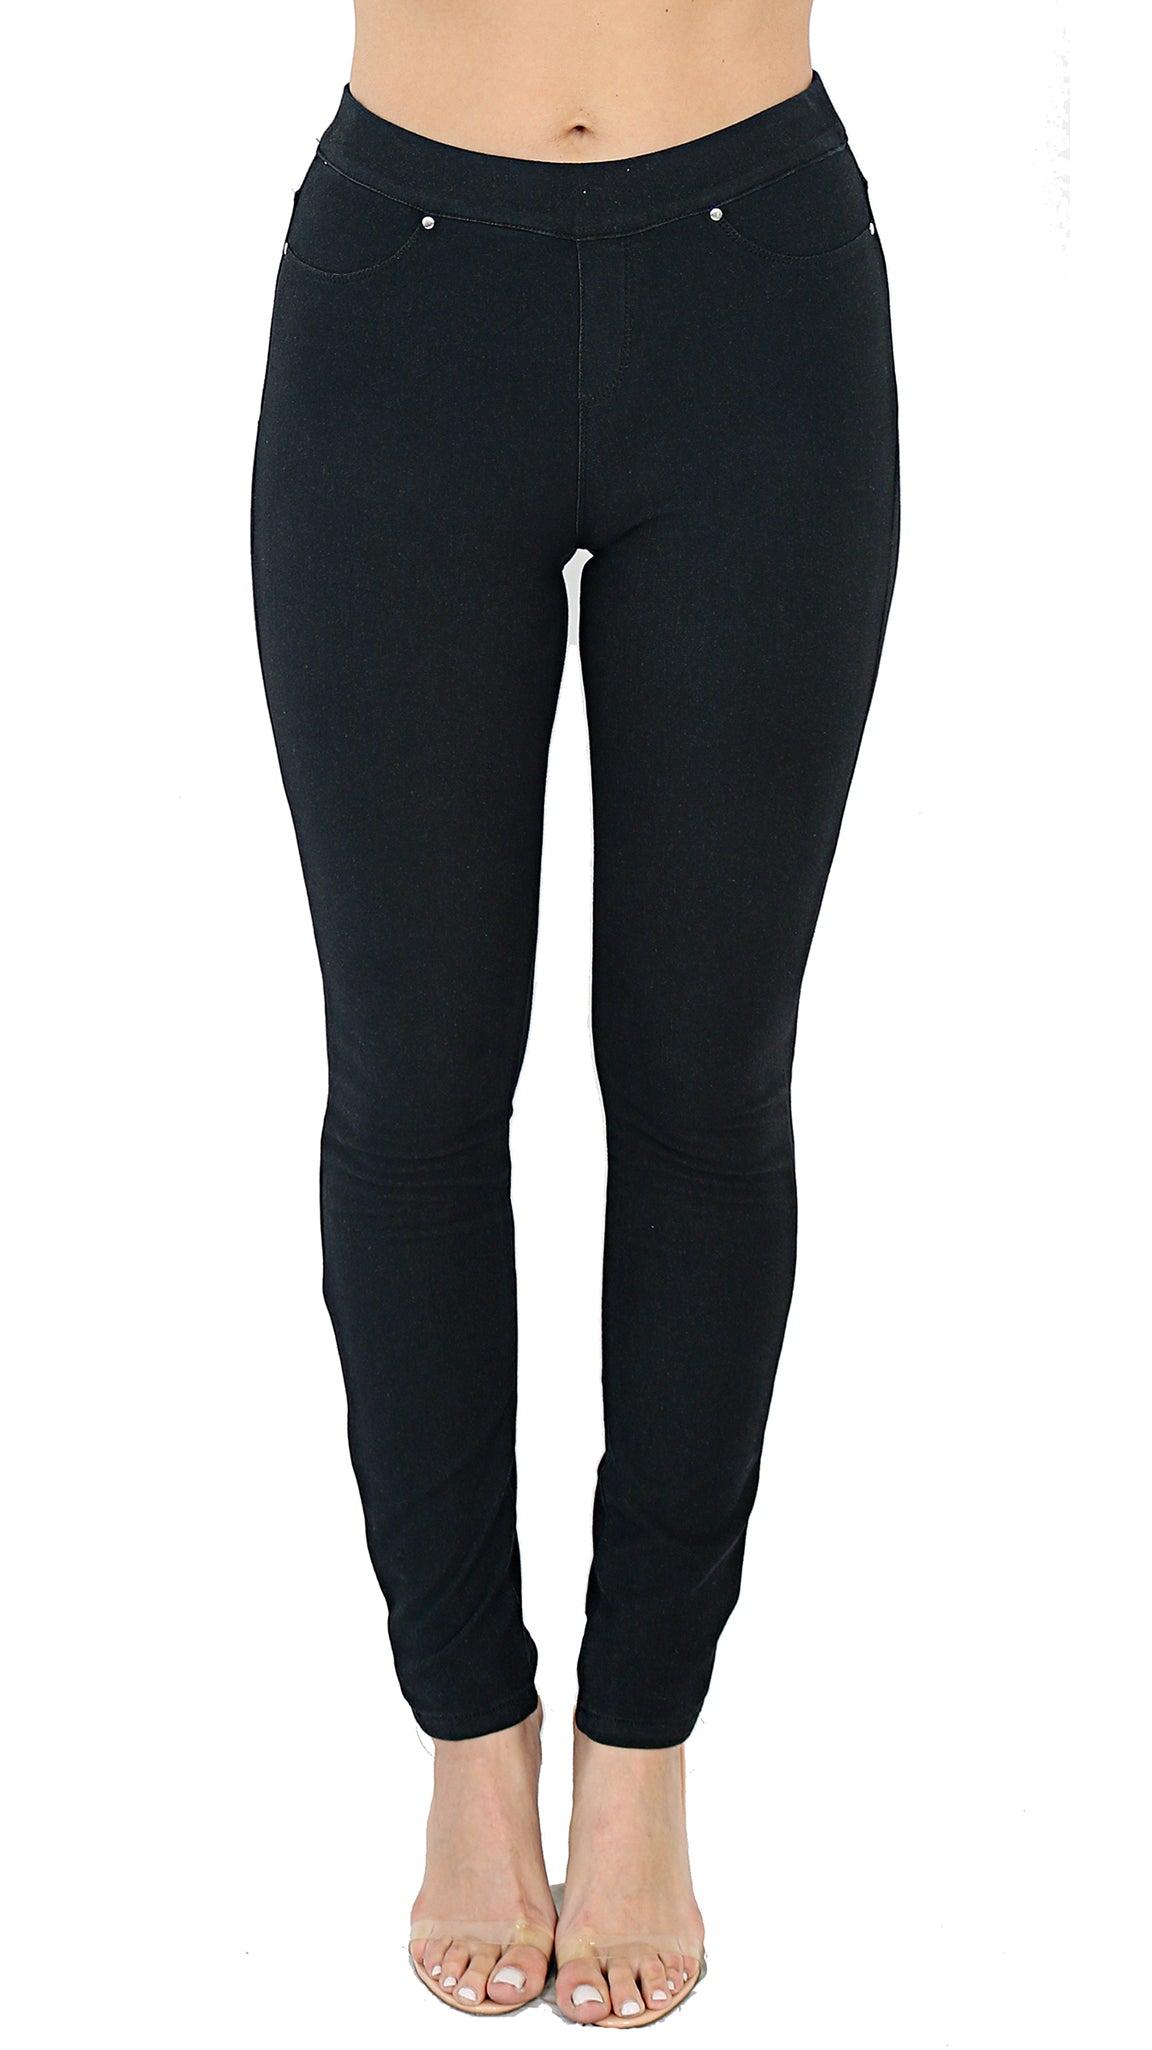 French Terry Cotton Blend Yoga Pants